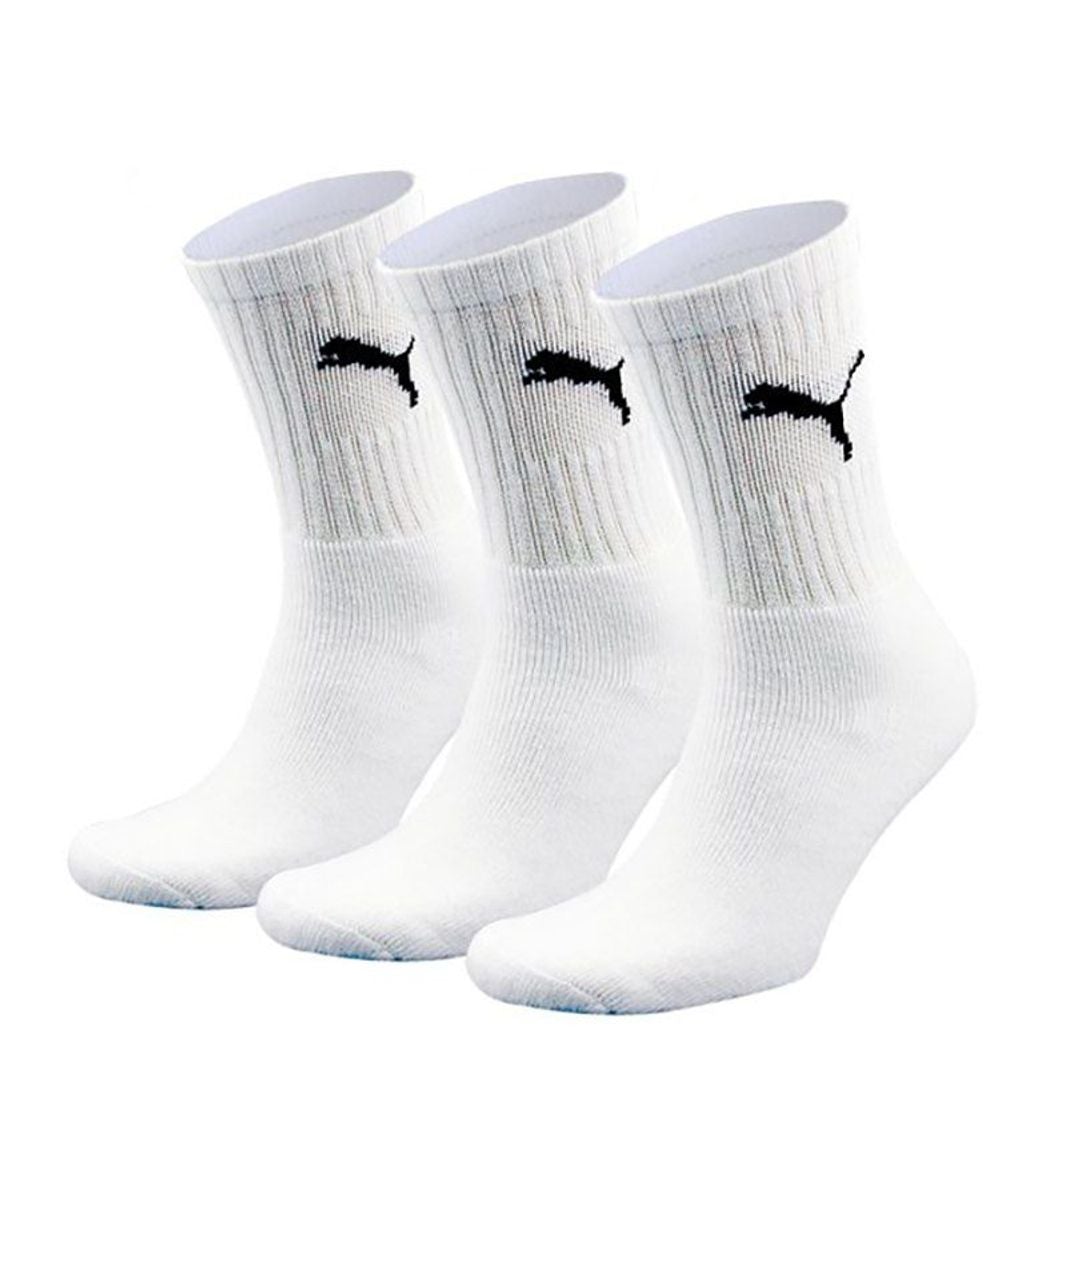 PUMA Sport Socks (3 pairs for $18)  (6 pairs for $27)